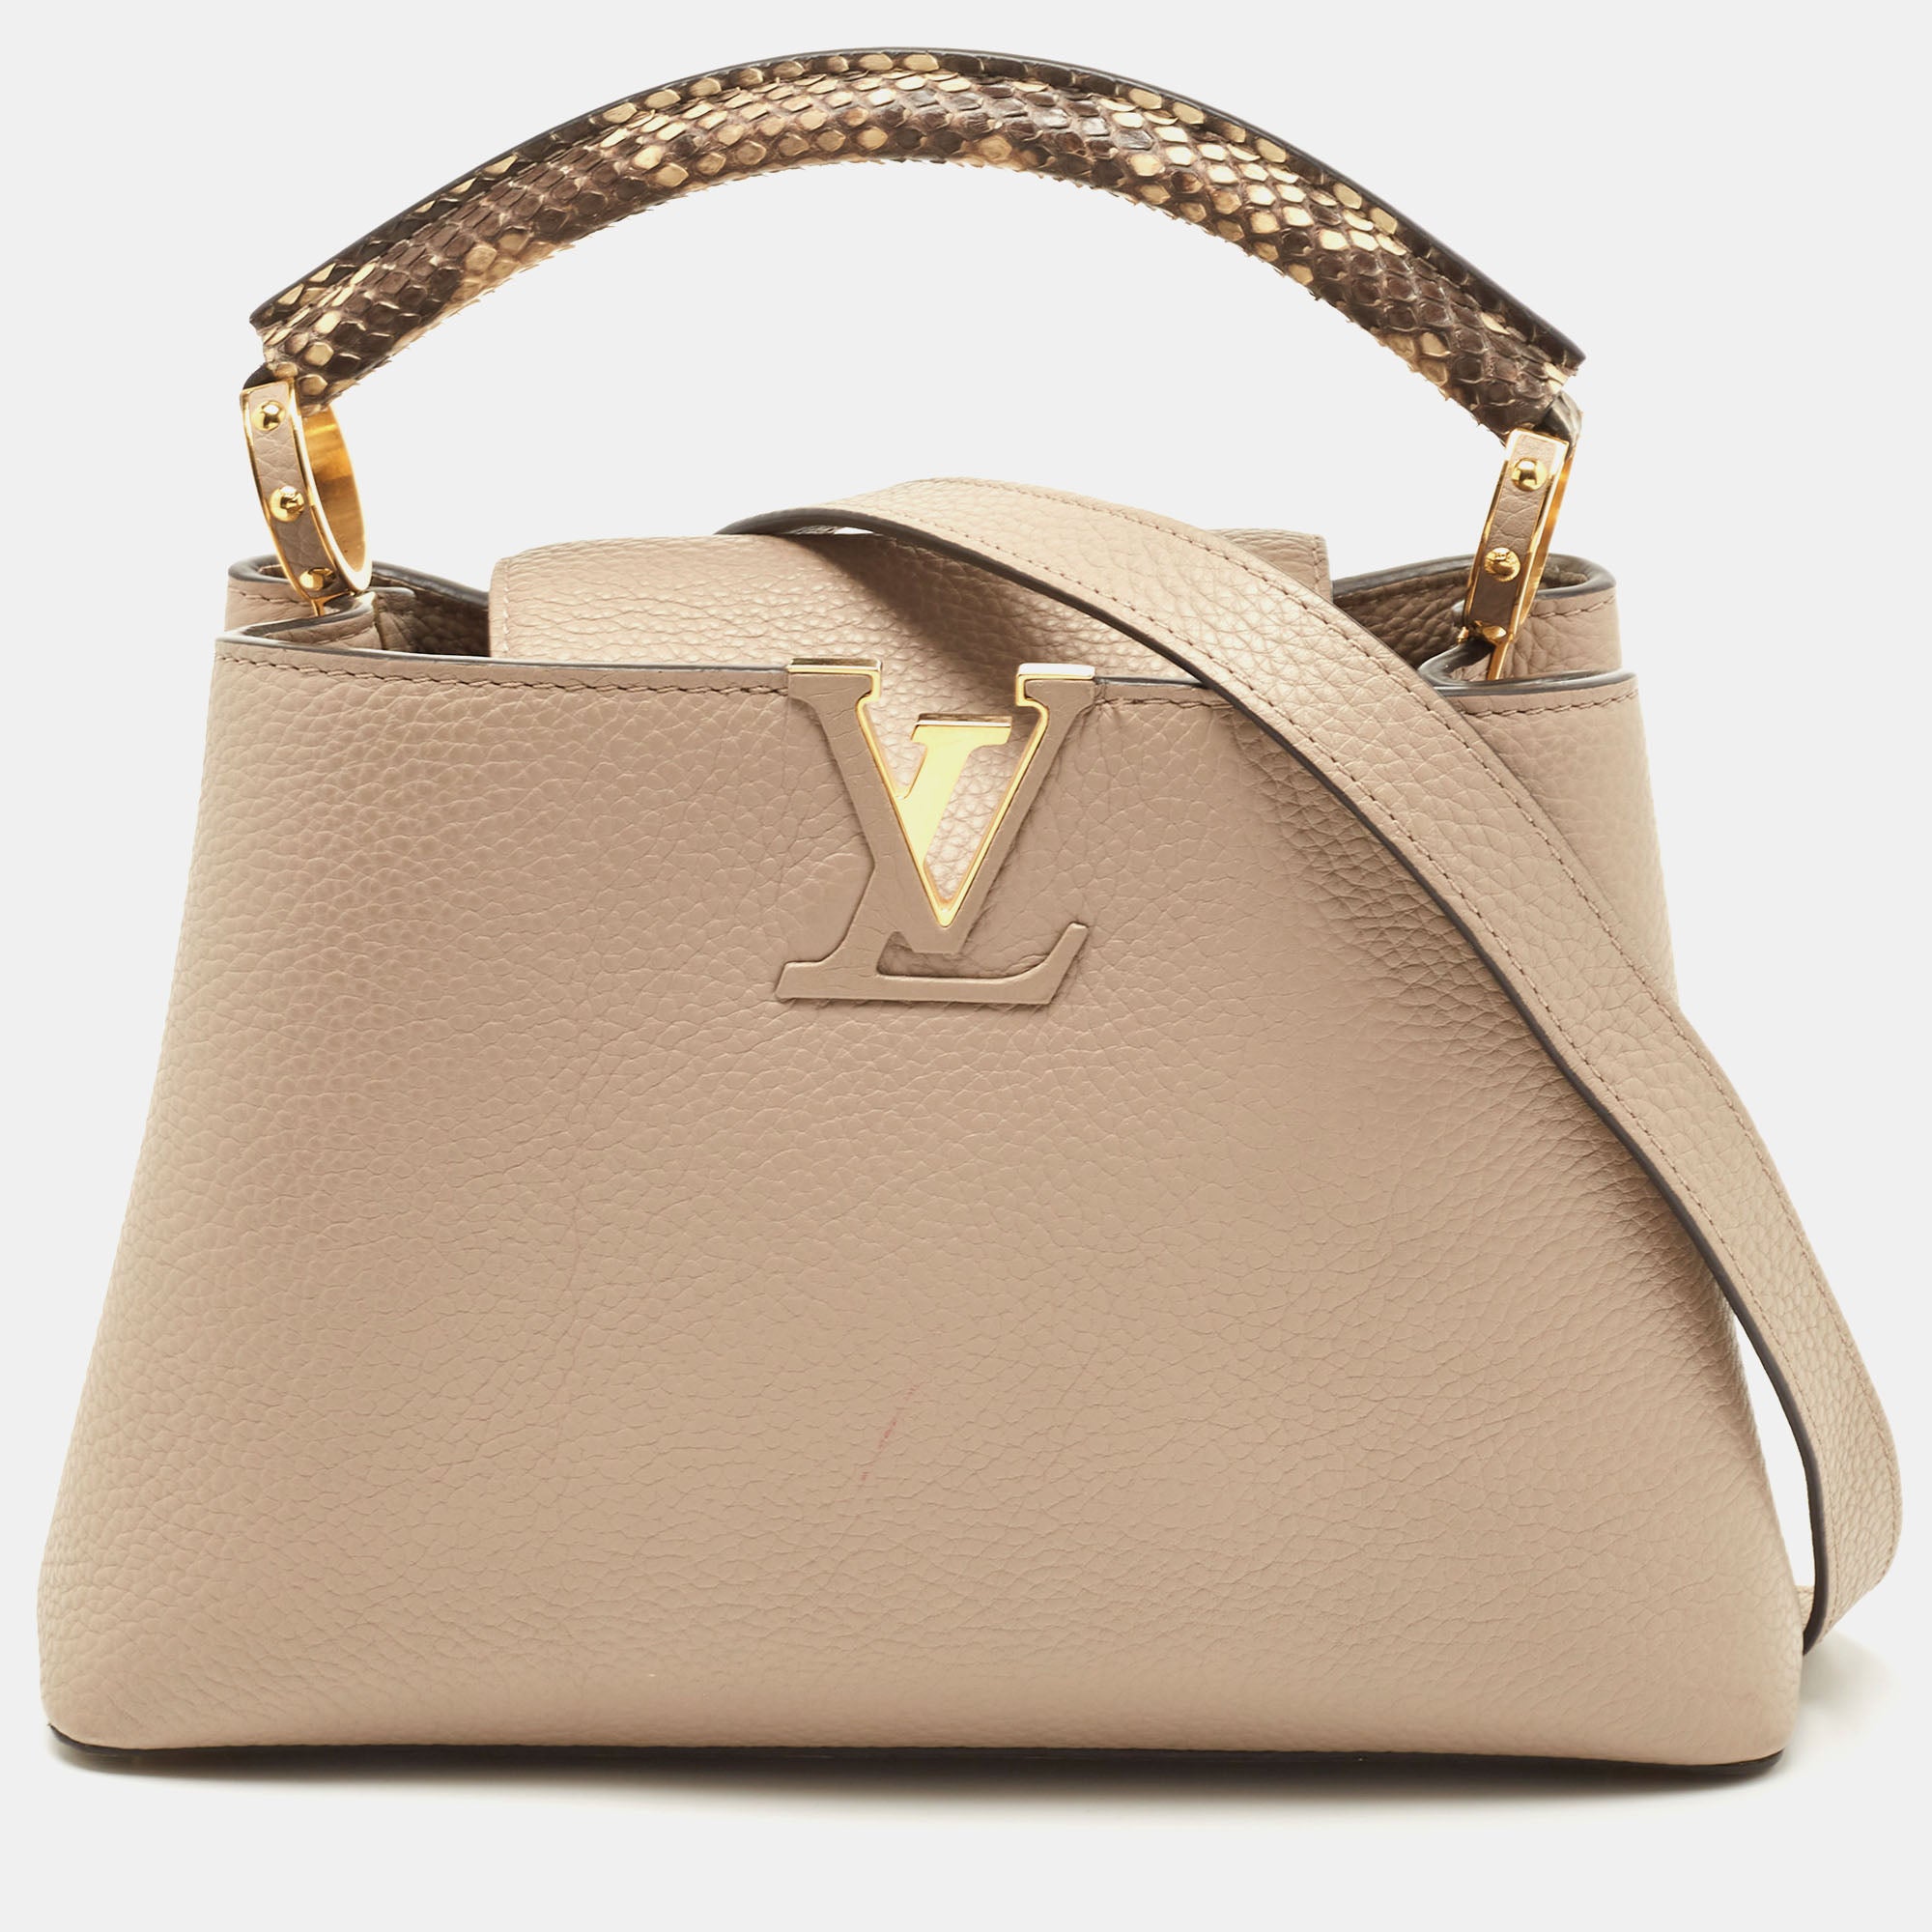 Louis Vuitton Capucines Bag BB Lilas in Taurillon Leather with